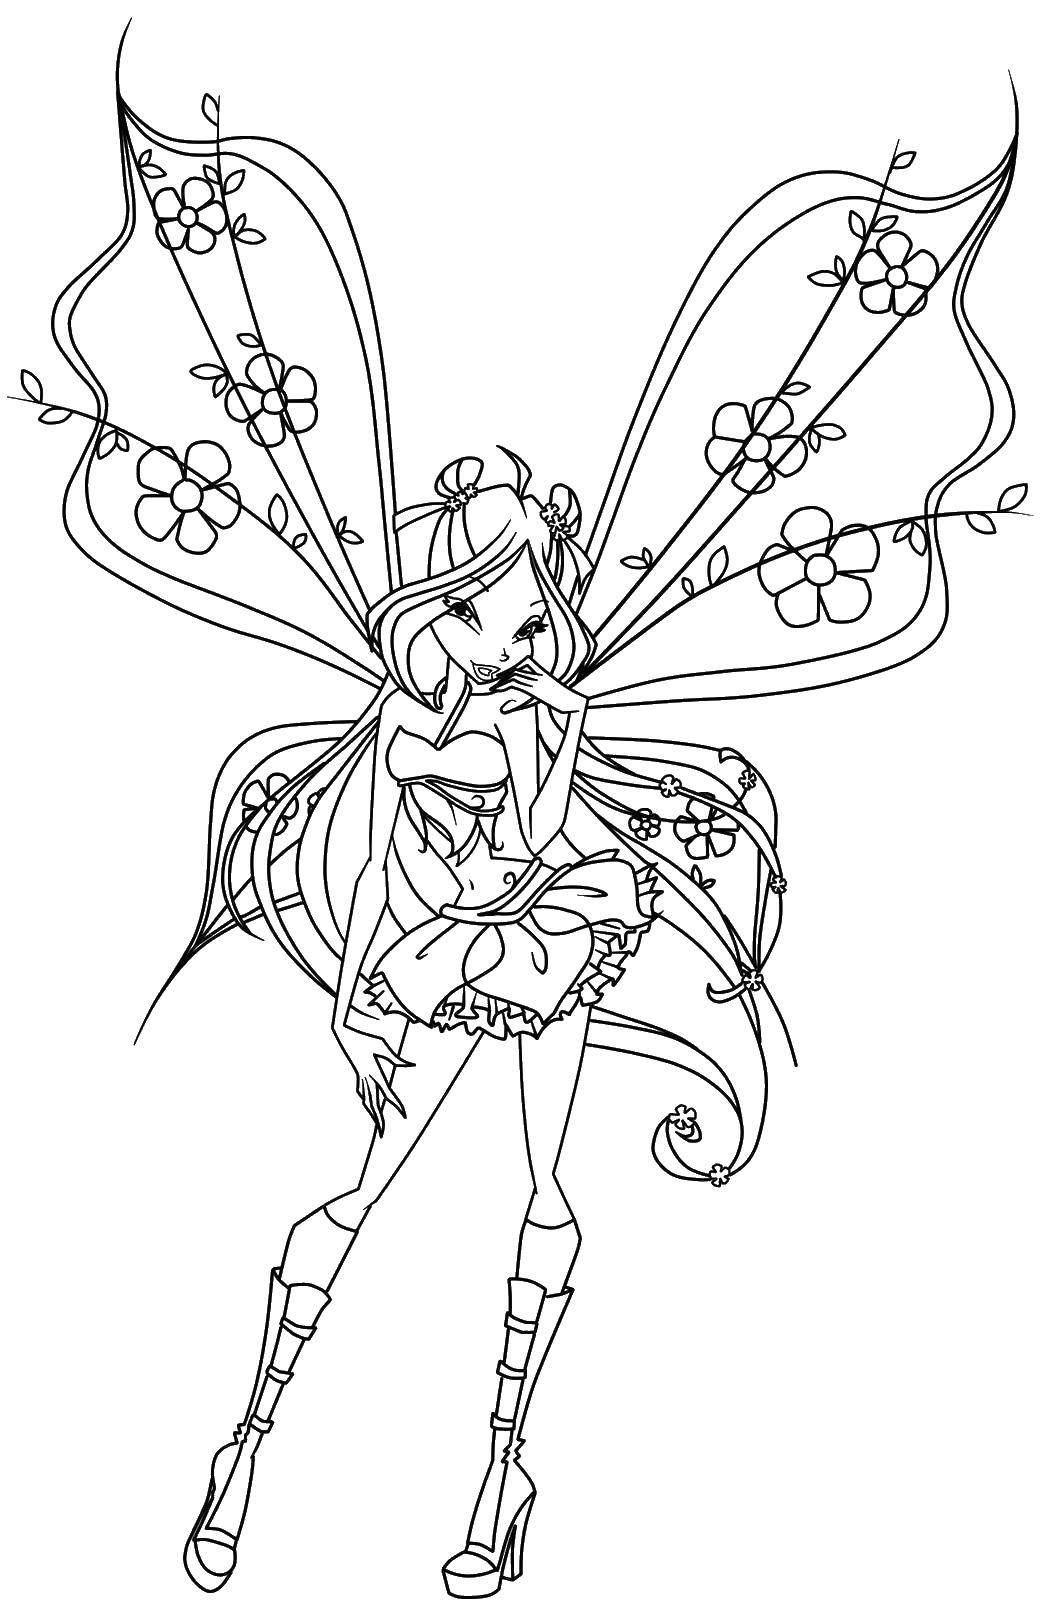 Coloring Flora from winx club. Category Winx. Tags:  Flora, Winx.